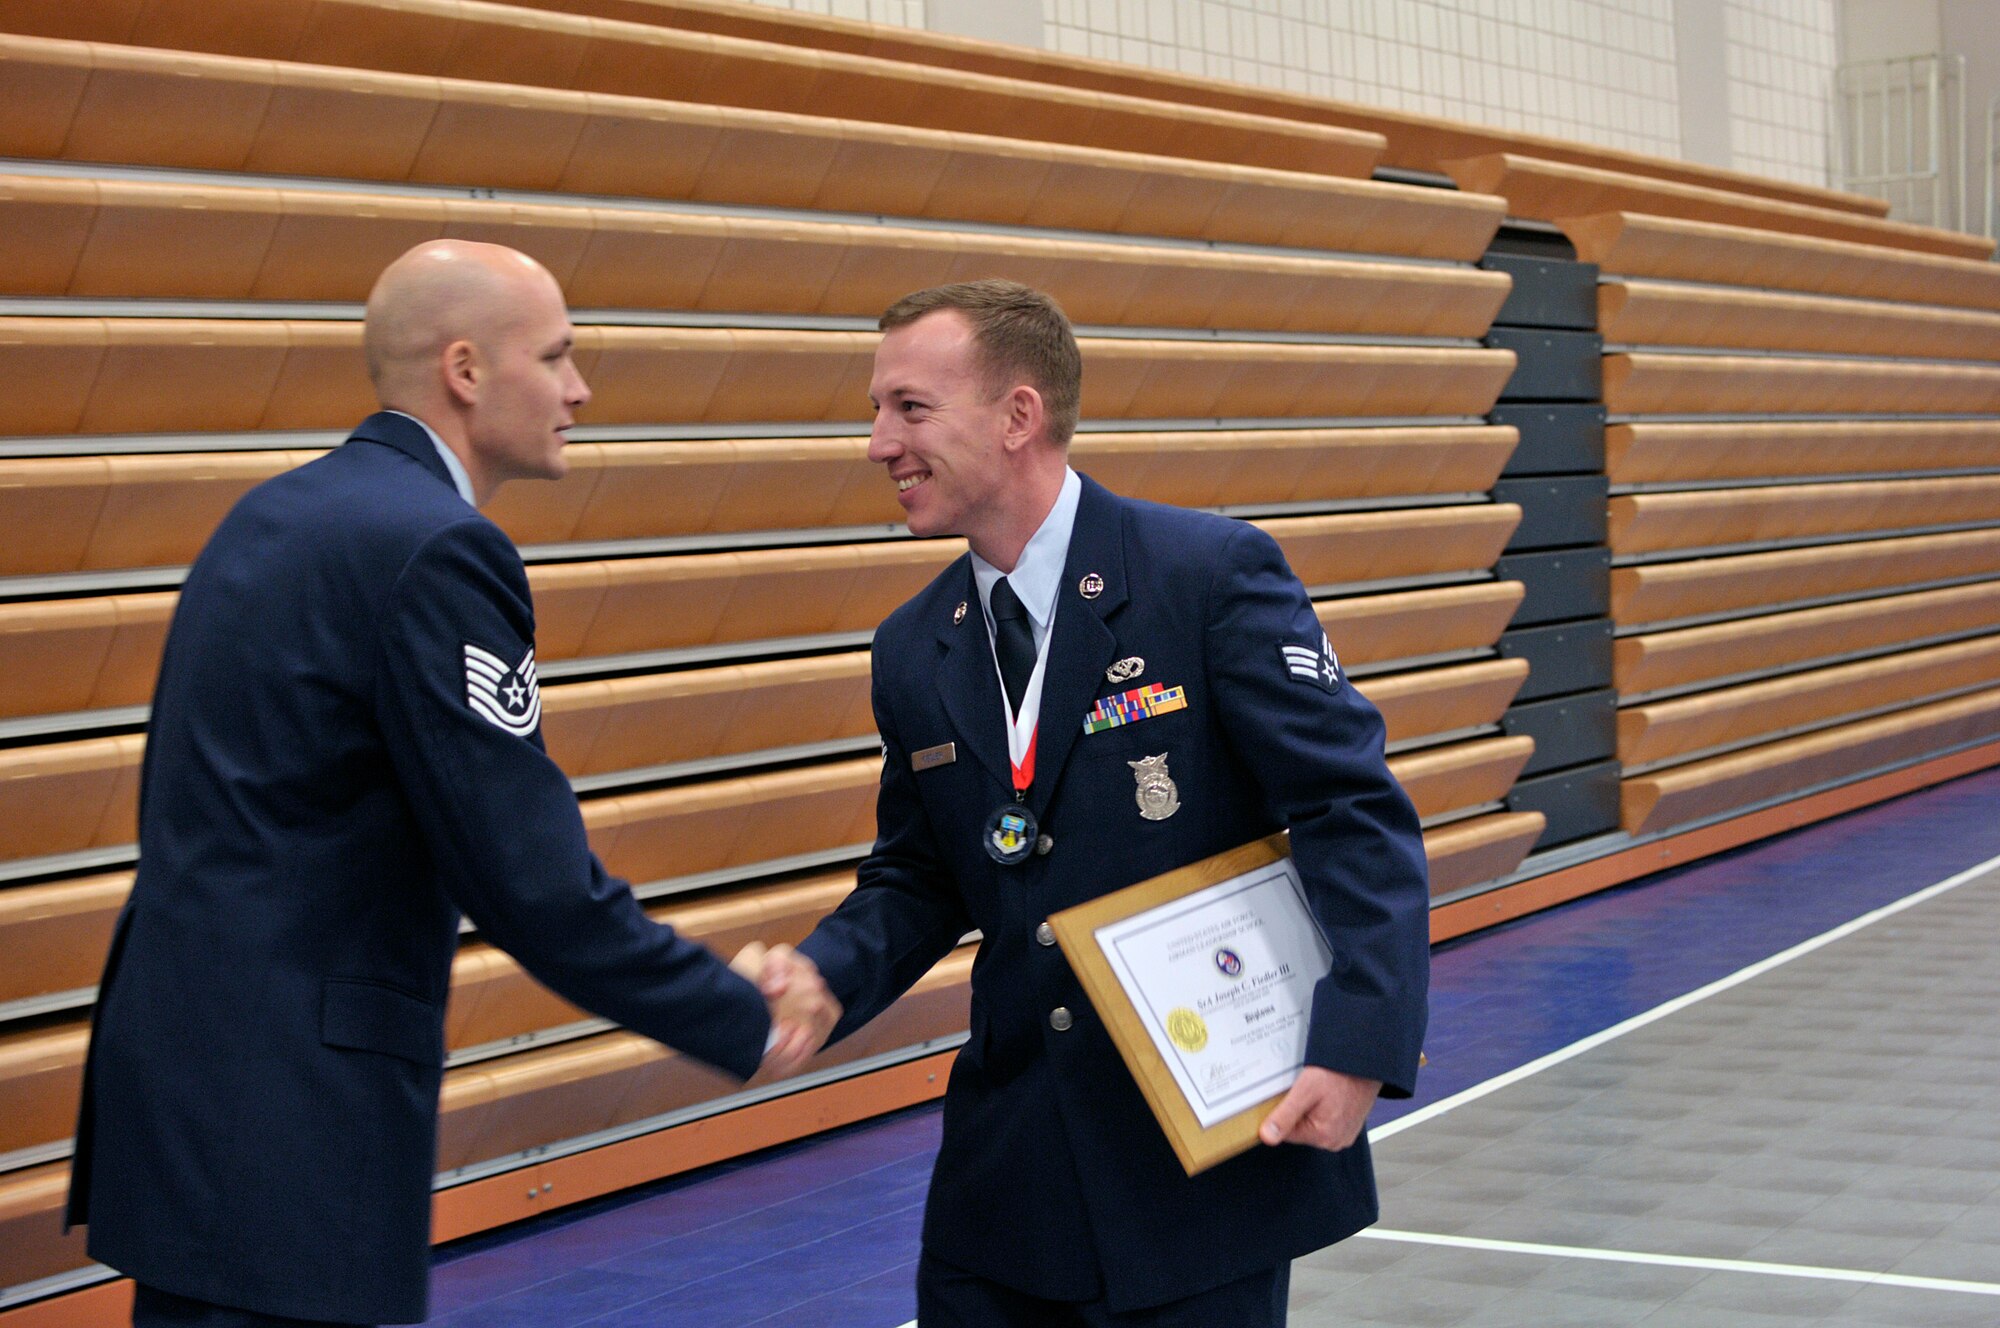 MCGHEE TYSON AIR NATIONAL GUARD BASE, Tenn. - Senior Airman Joseph C. Fiedler III, right, shakes hands with his Airman Leadership School instructor Tech. Sgt. John McClean after receiving his diploma at the I.G. Brown Training and Education Center here Nov. 20 during his class graduation ceremony. At least 273 Airmen and three Coast Guardsmen made up the Paul H. Lankford Enlisted Professional Military Education Center's graduated NCO Academy Class 15-1 and Airman Leadership School Class 15-1. (U.S. Air National Guard photo by Master Sgt. Mike R. Smith/Released)